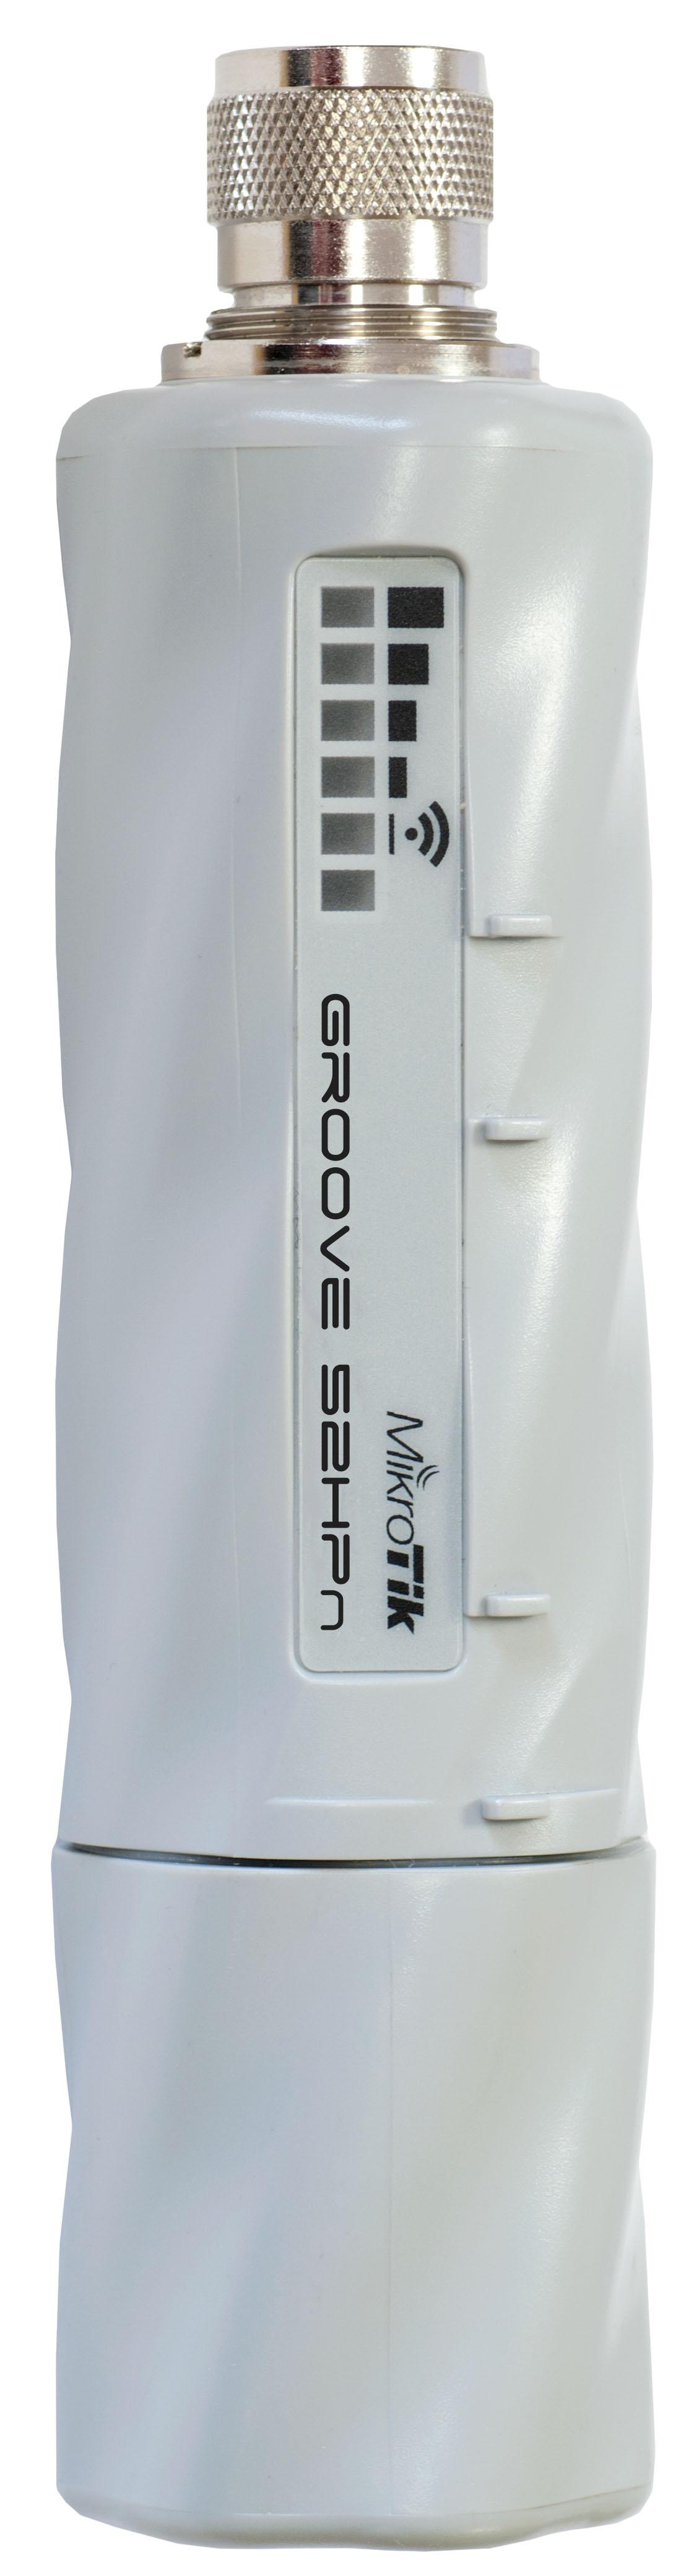 Mikrotik GrooveA 52HPn 2.4/5ghz OUTDOOR Acces Poin